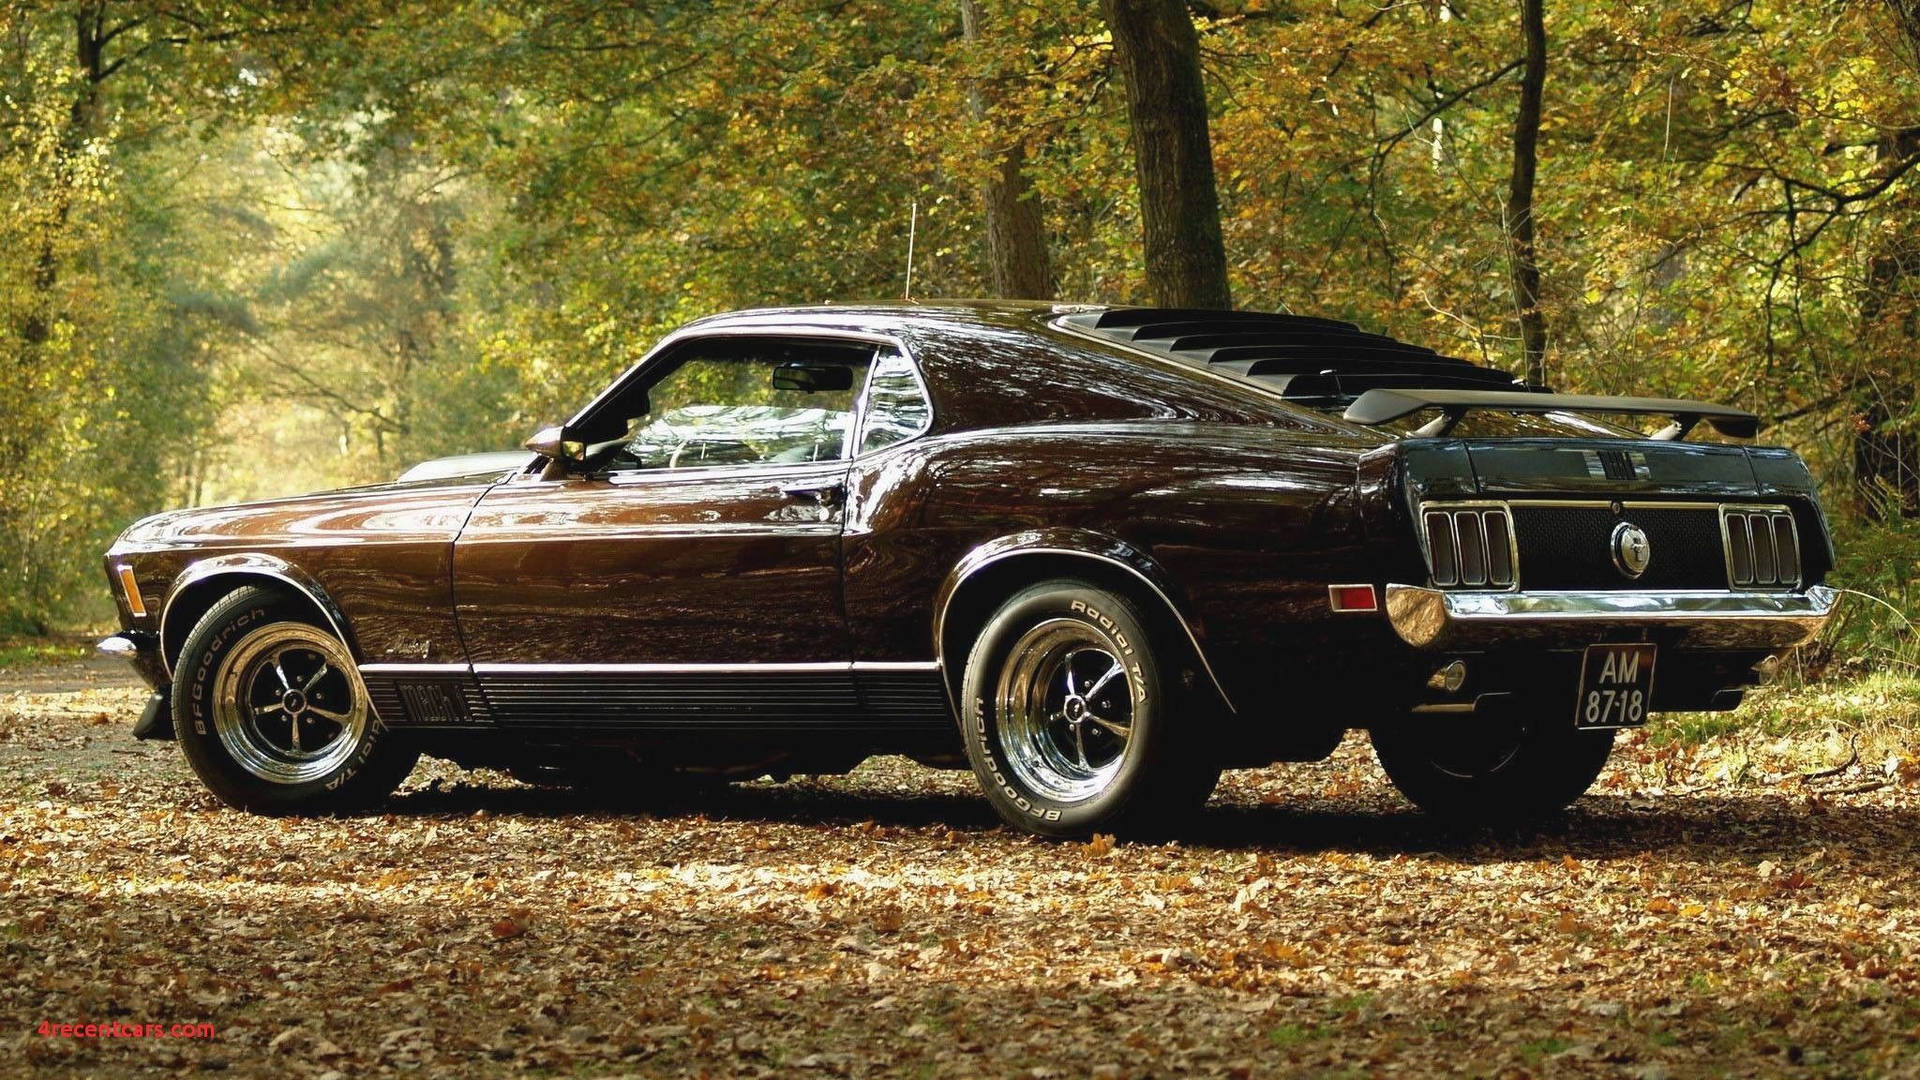 Brown Ford Mustang Muscle Car Wallpaper